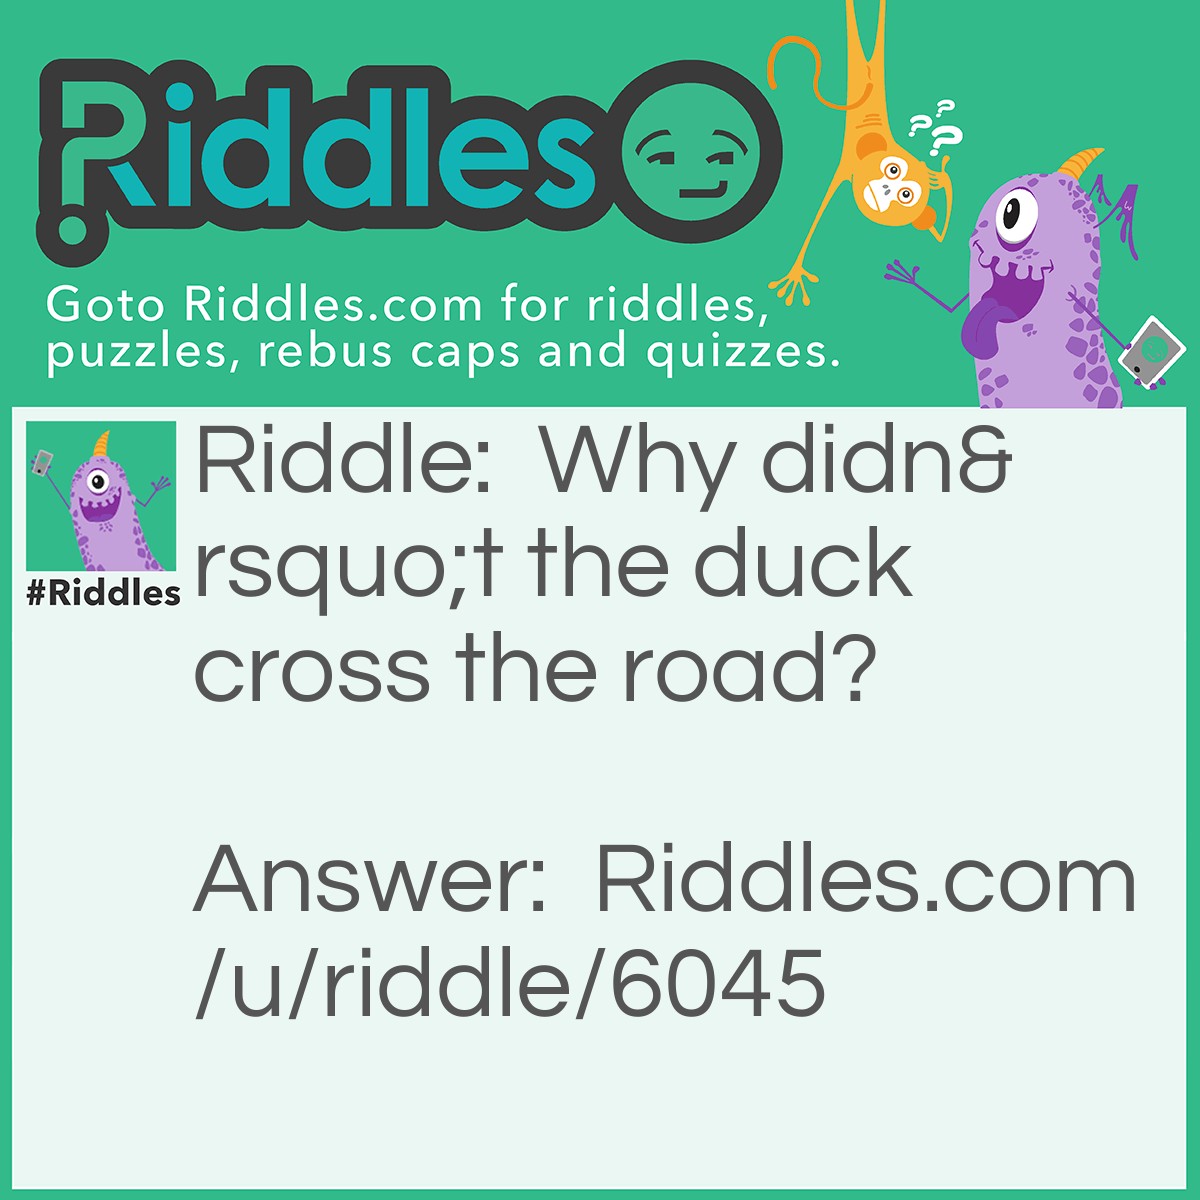 Riddle: Why didn't the duck cross the road? Answer: Because he was in New York (New York has lots of cars and not safe to cross the street there)